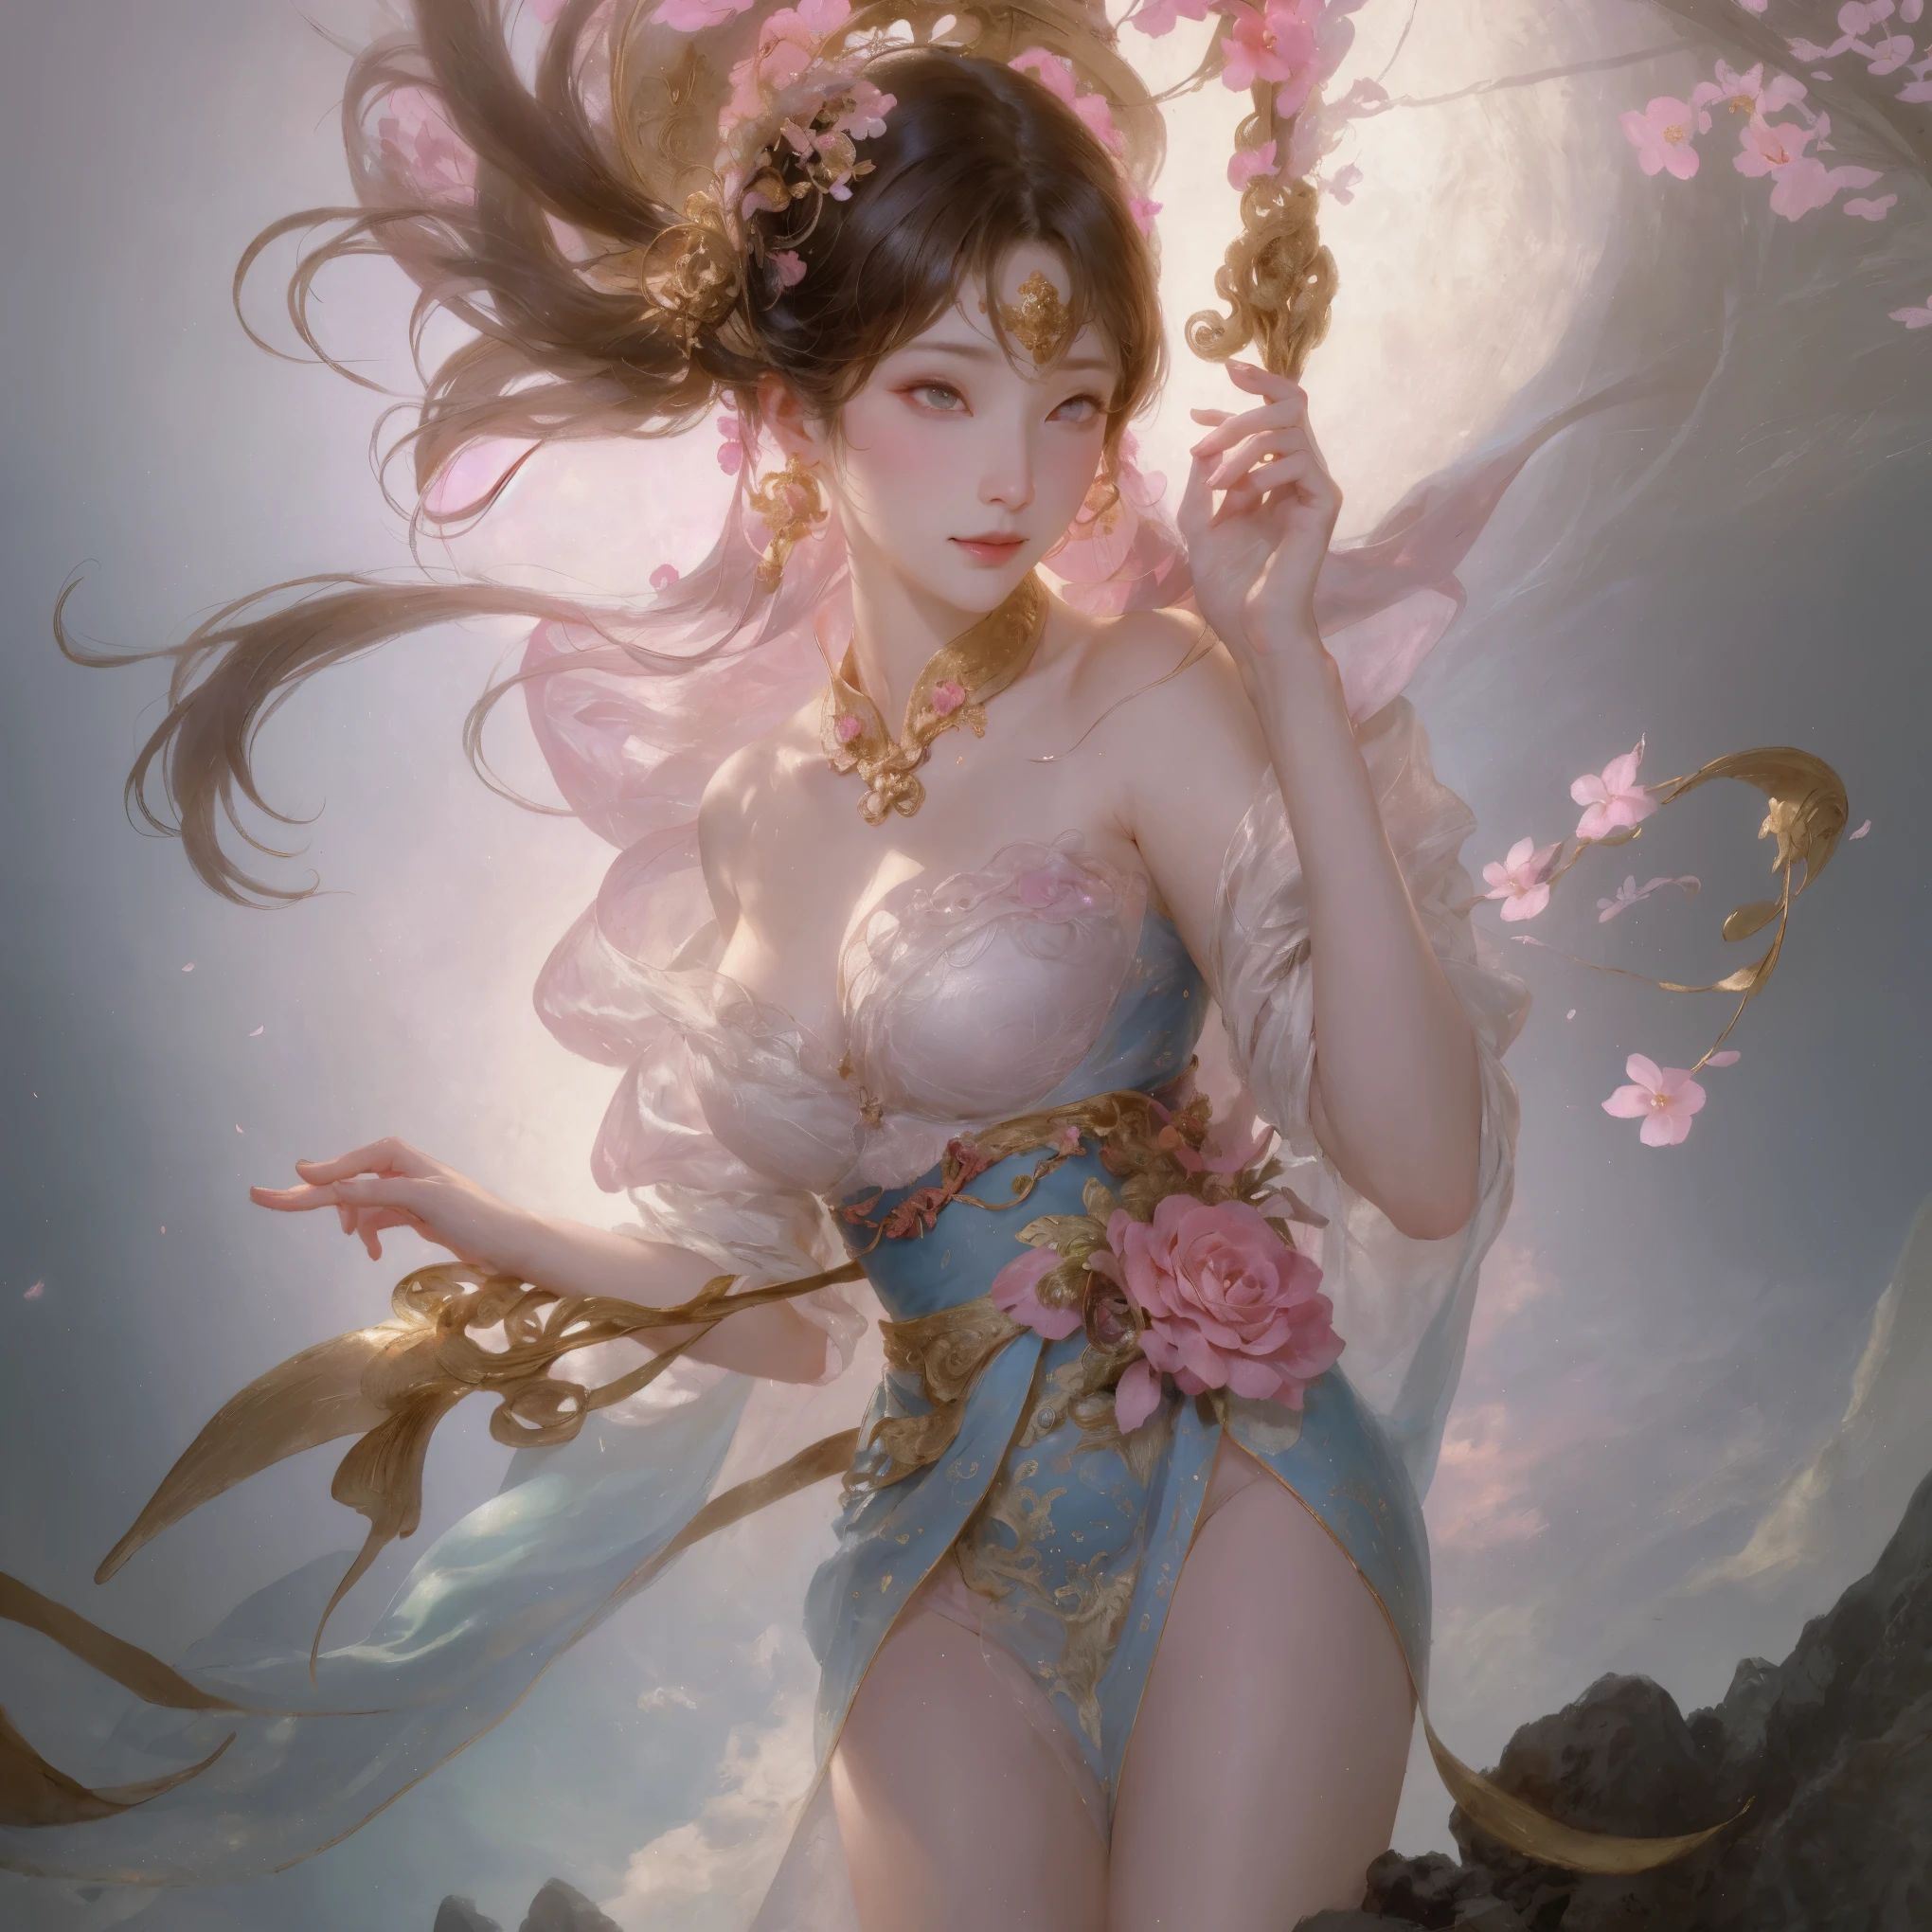 There were women in ancient China, alone, detailed, delicate skin, exquisite features, detailed face and eyes, ancient chinese costume，Close up of pink and white clothes，beautiful eyes，detailed face，fancy clothes，dream-like, red and blue-green flowers, Floating world style, Artwork in the style of Gwitz, Gwiz, Alphonse Mucha and Rose Drews, beautiful artistic illustration, author：Lee Song, author：hero, author：Zou Zhe, Be quiet, Written by Yeshin, author：Shimoo, author：Zhou Fang, korean art nouveau anime